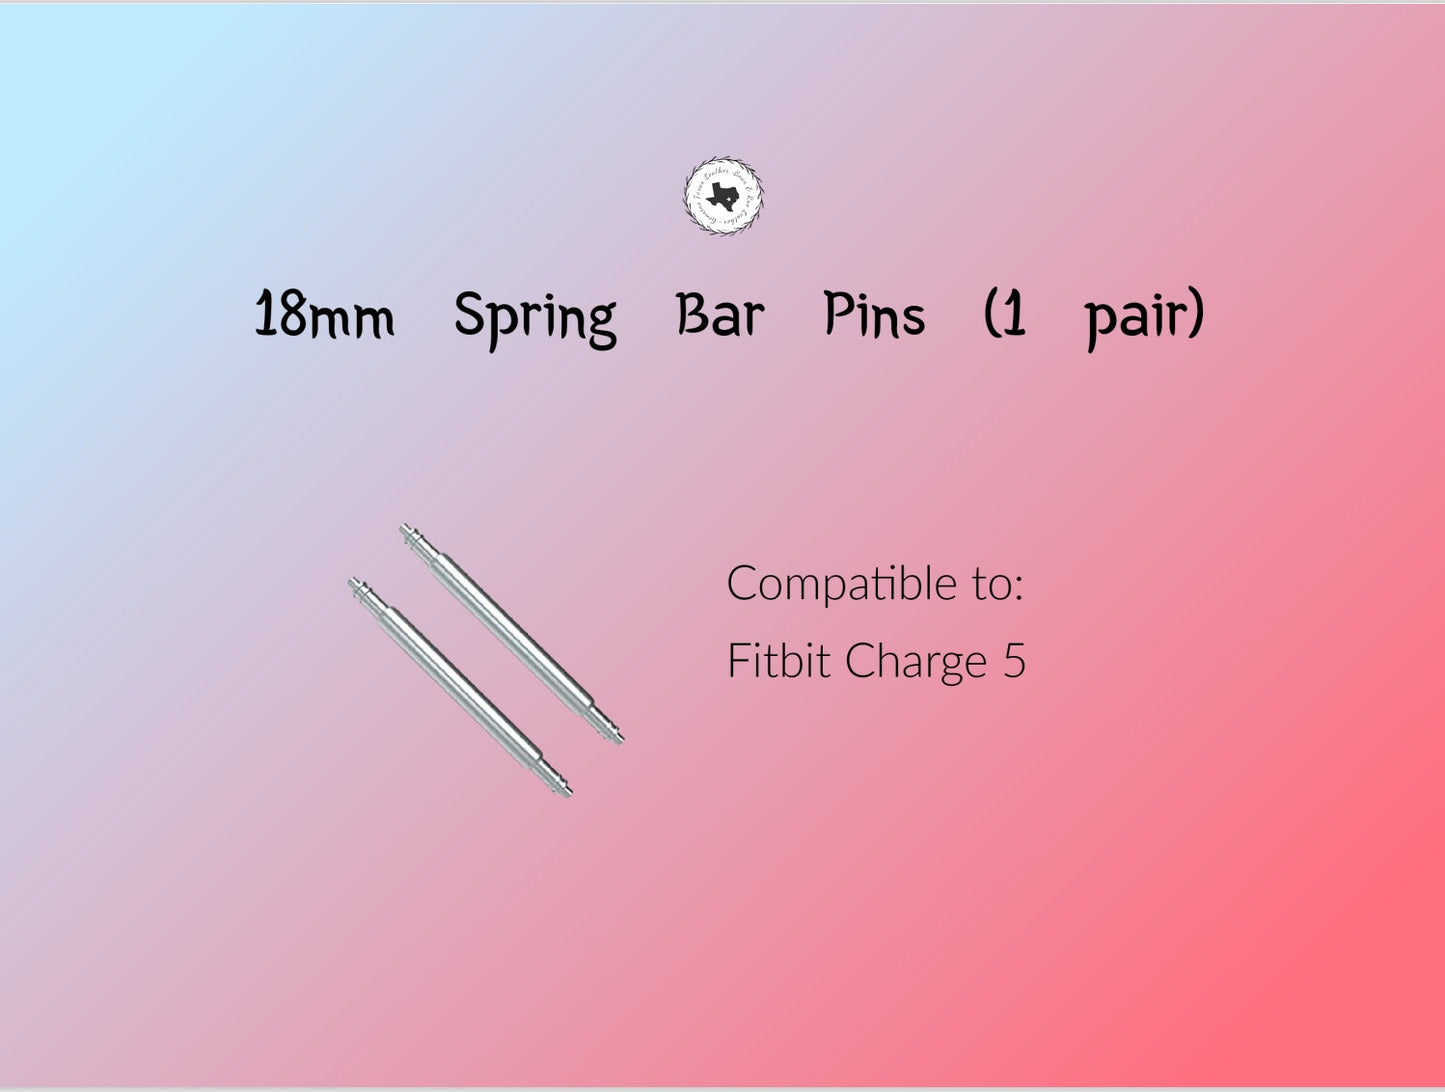 18mm Spring Bar Pins for Fitbit Charge 5